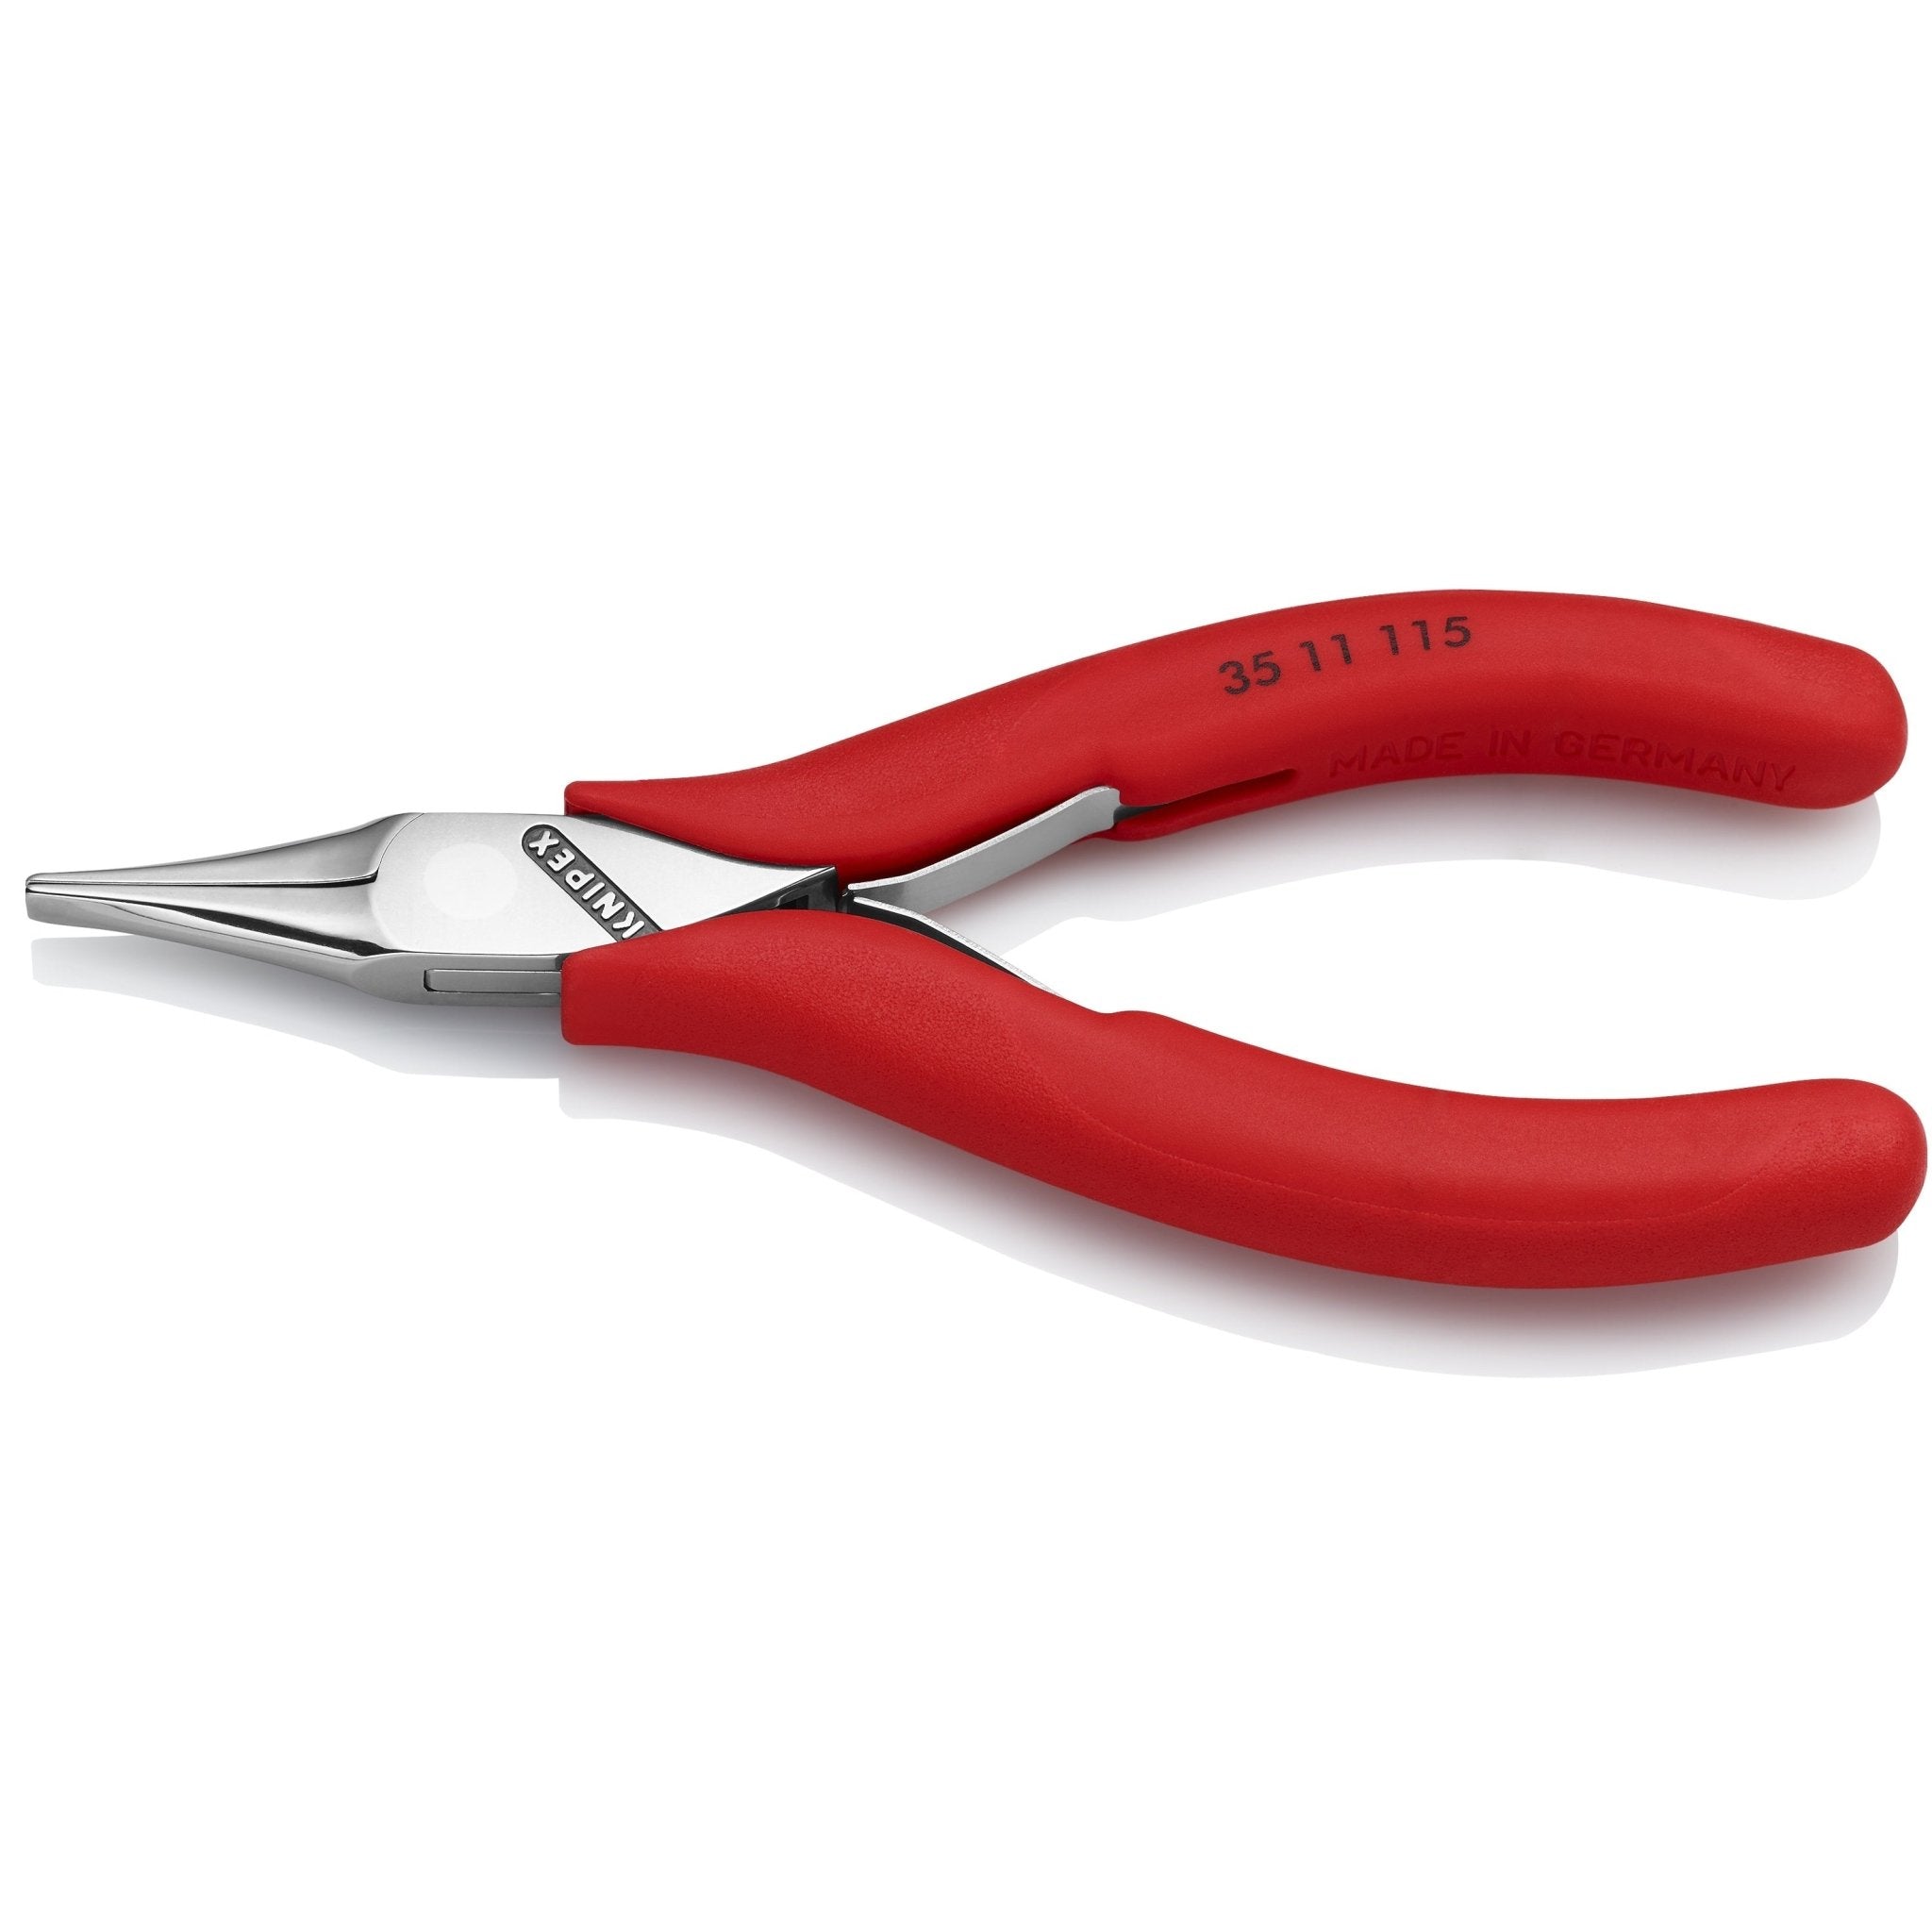 KNIPEX 4.5'' Electronics Pliers, Flat Tips with Comfort Grip